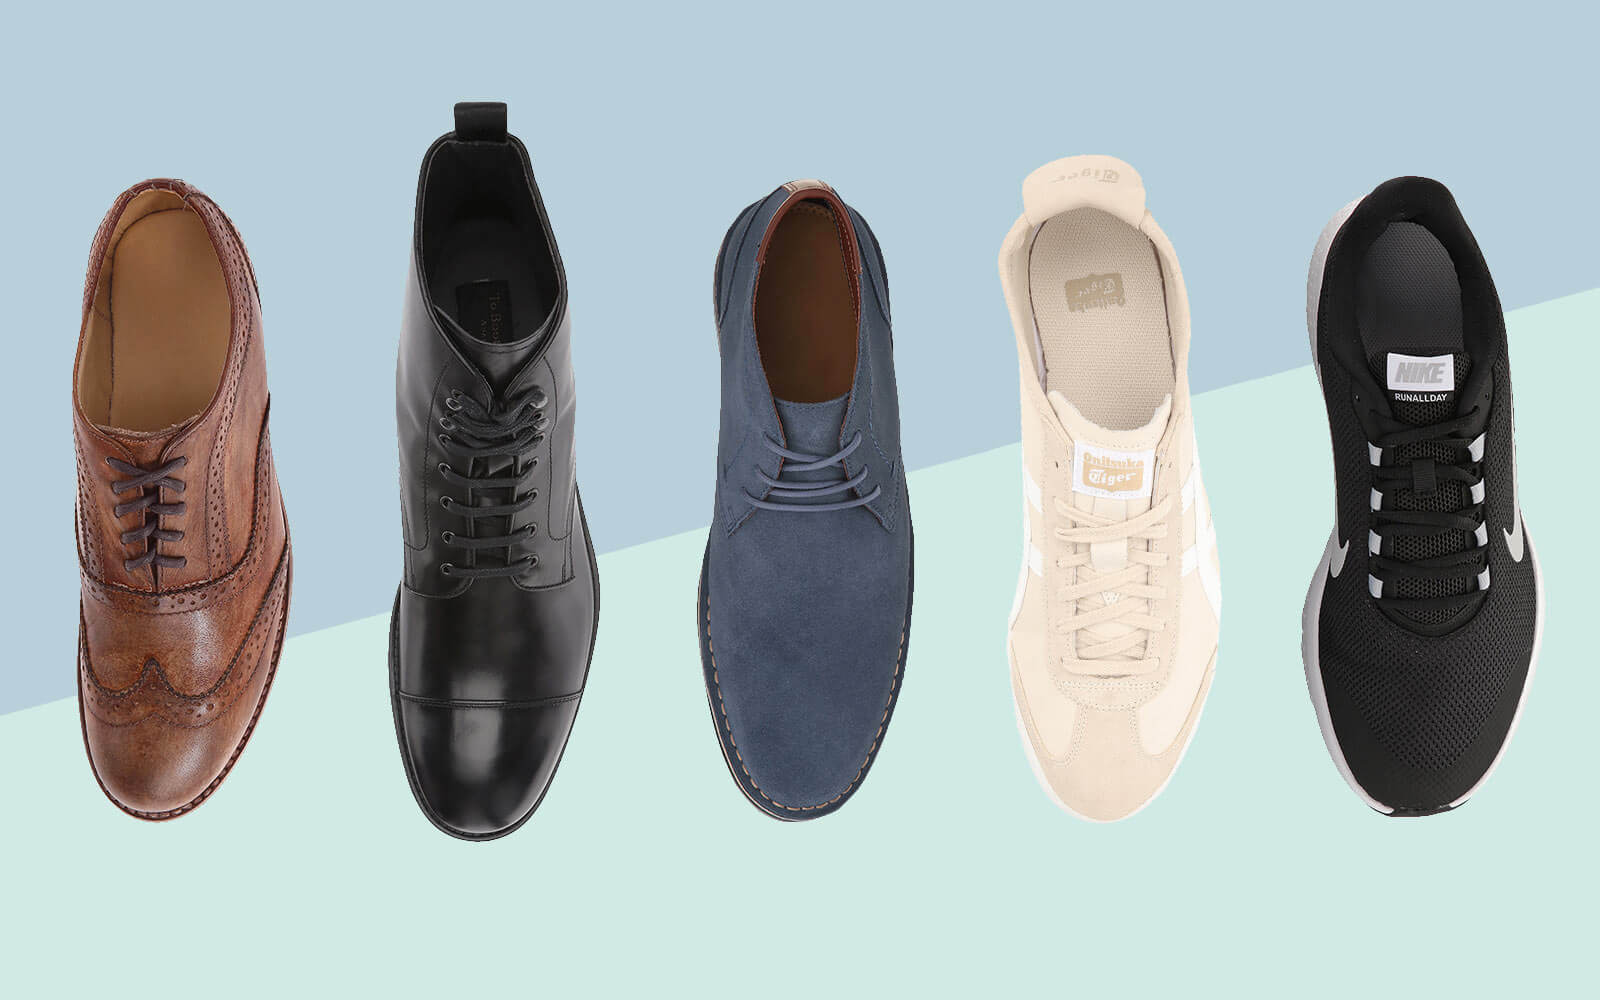 5 Dress Shoes Every Professional Man Should Own